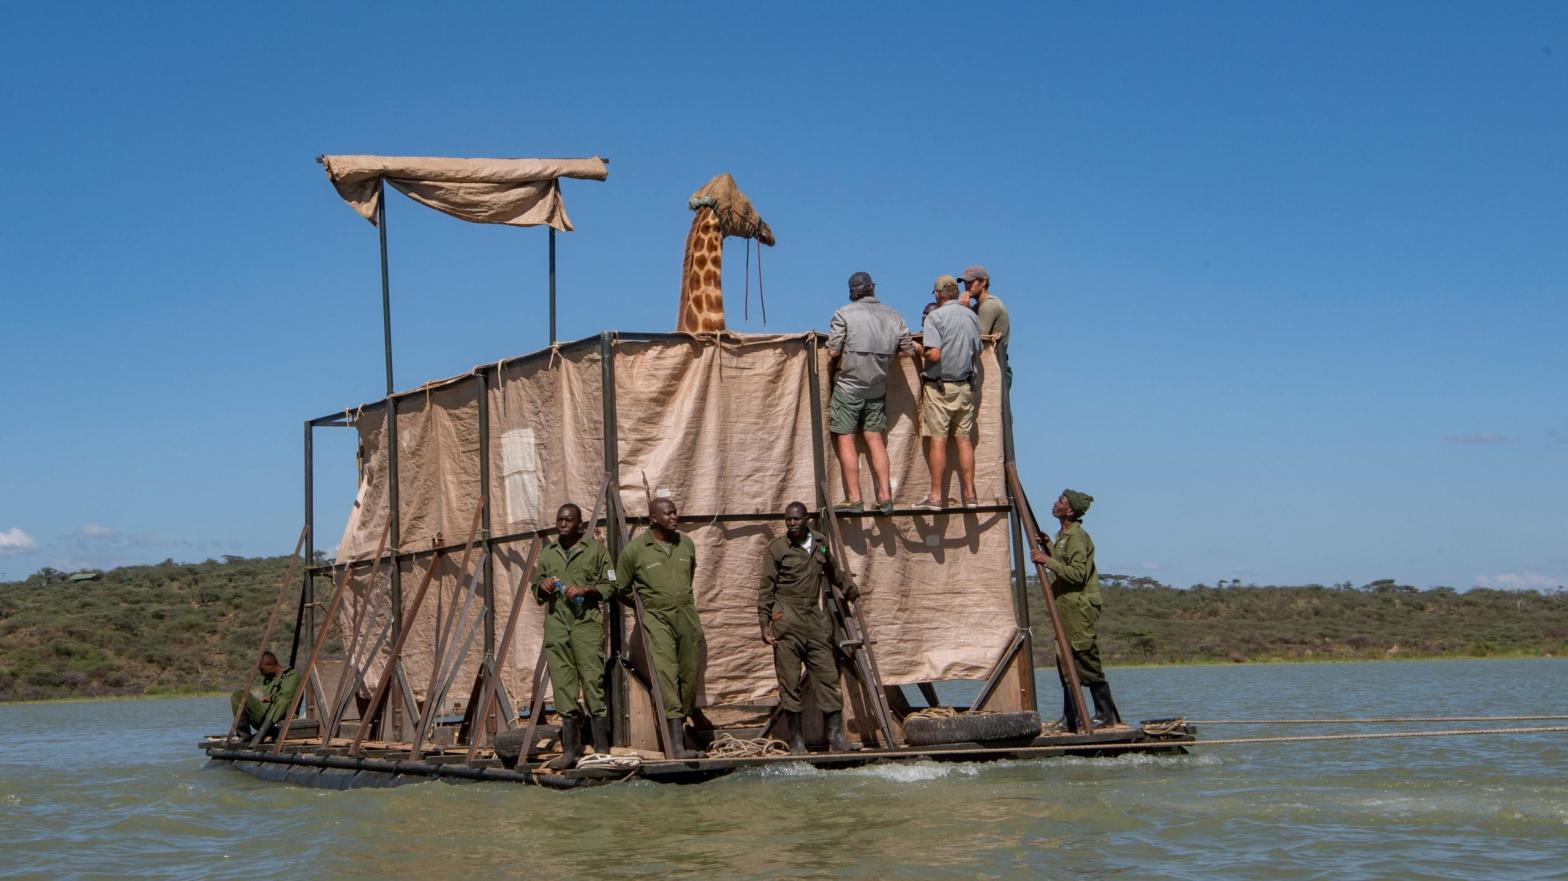 The barge includes tall fencing to keep Asiwa from falling over. Asiwa was sedated and had a hood placed on her to keep her calm during the mile-long journey across the lake.  (Photo: Ami Vitale/Save Giraffes Now)